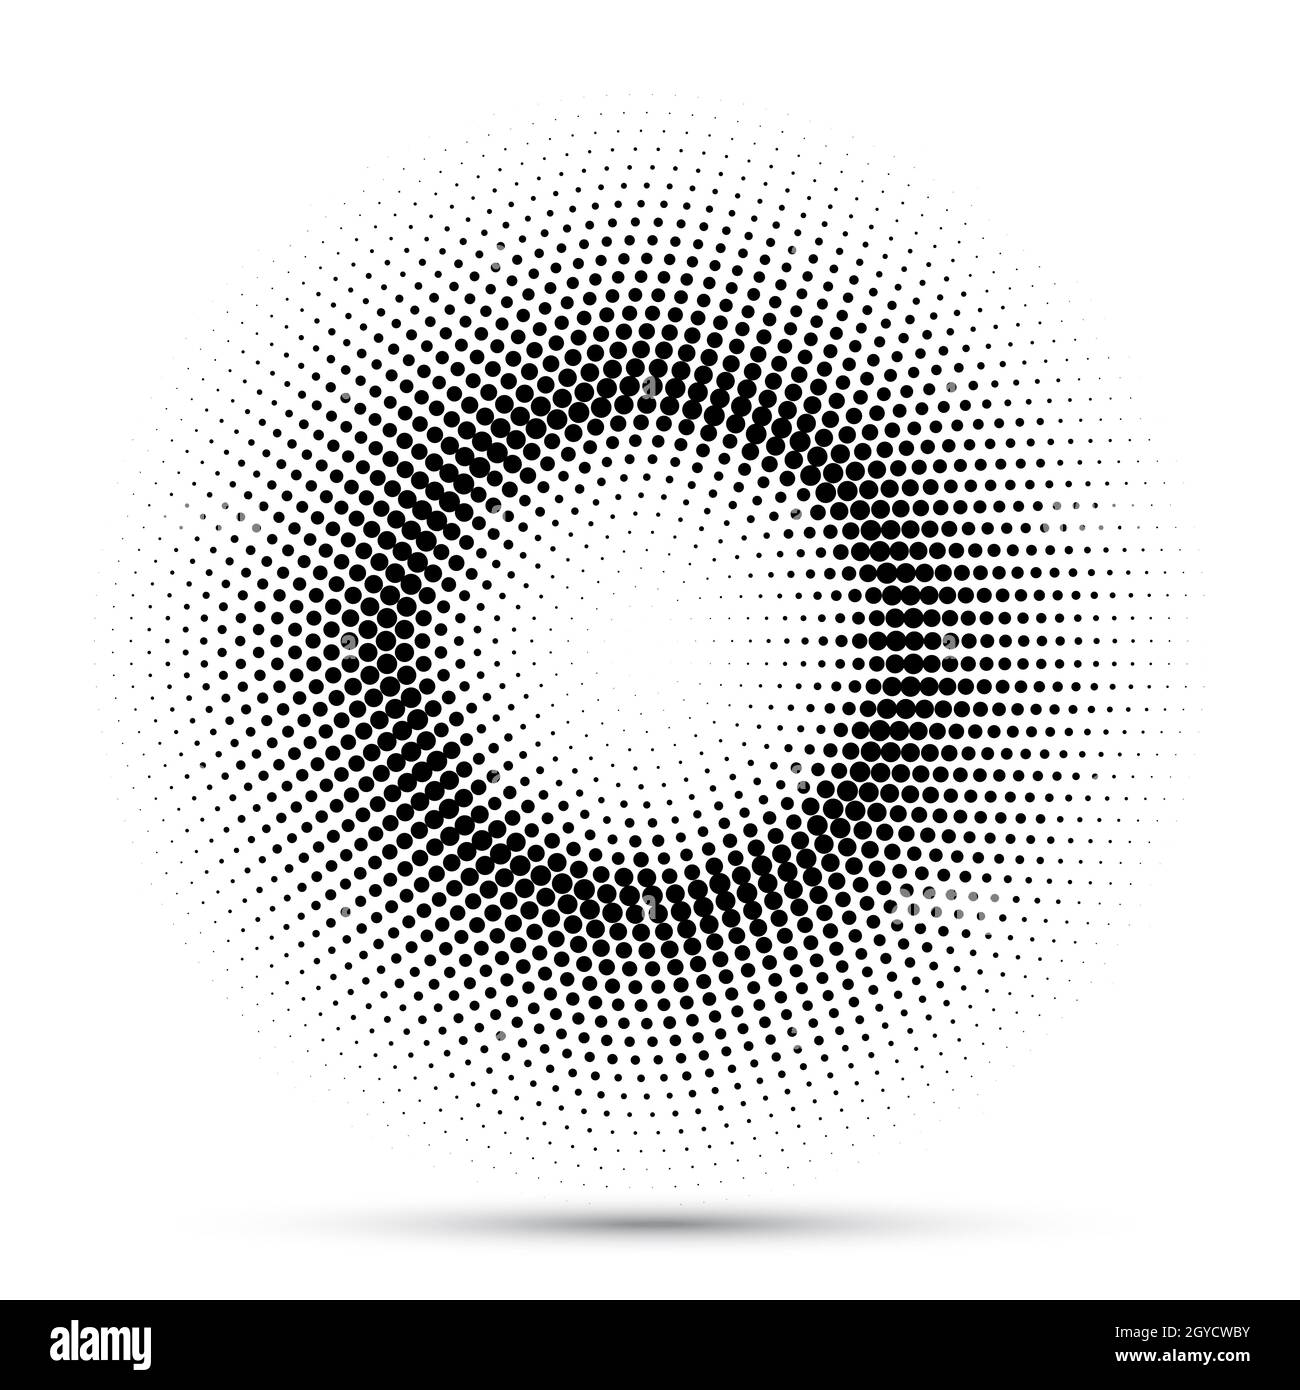 Abstract background with halftone dots design Stock Photo